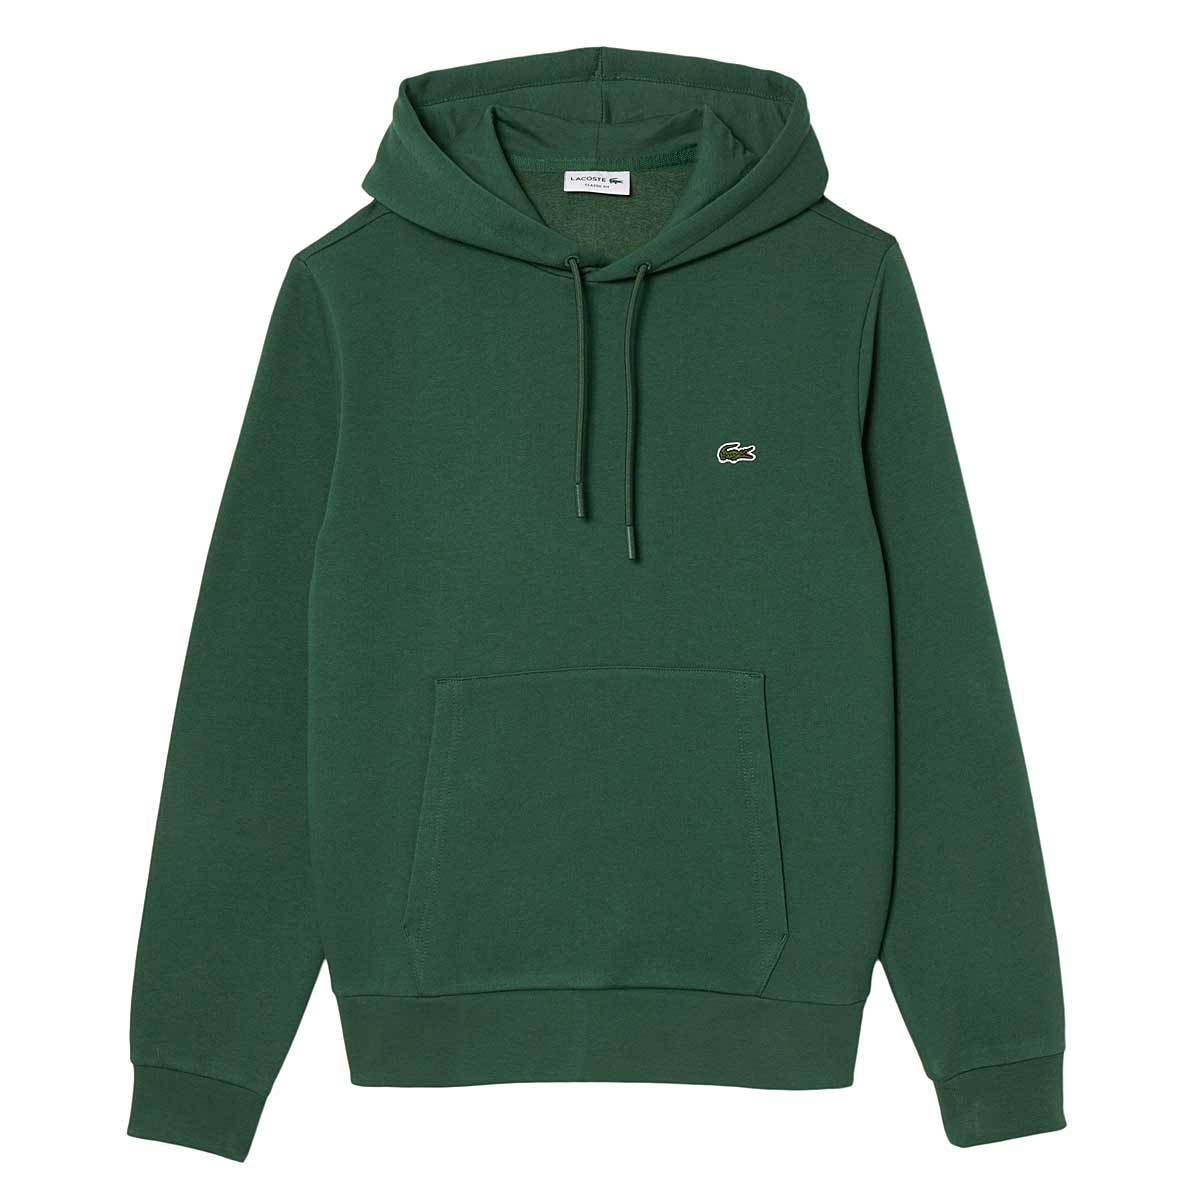 Image of Lacoste Classic Small Croc Hoody, Dark Green